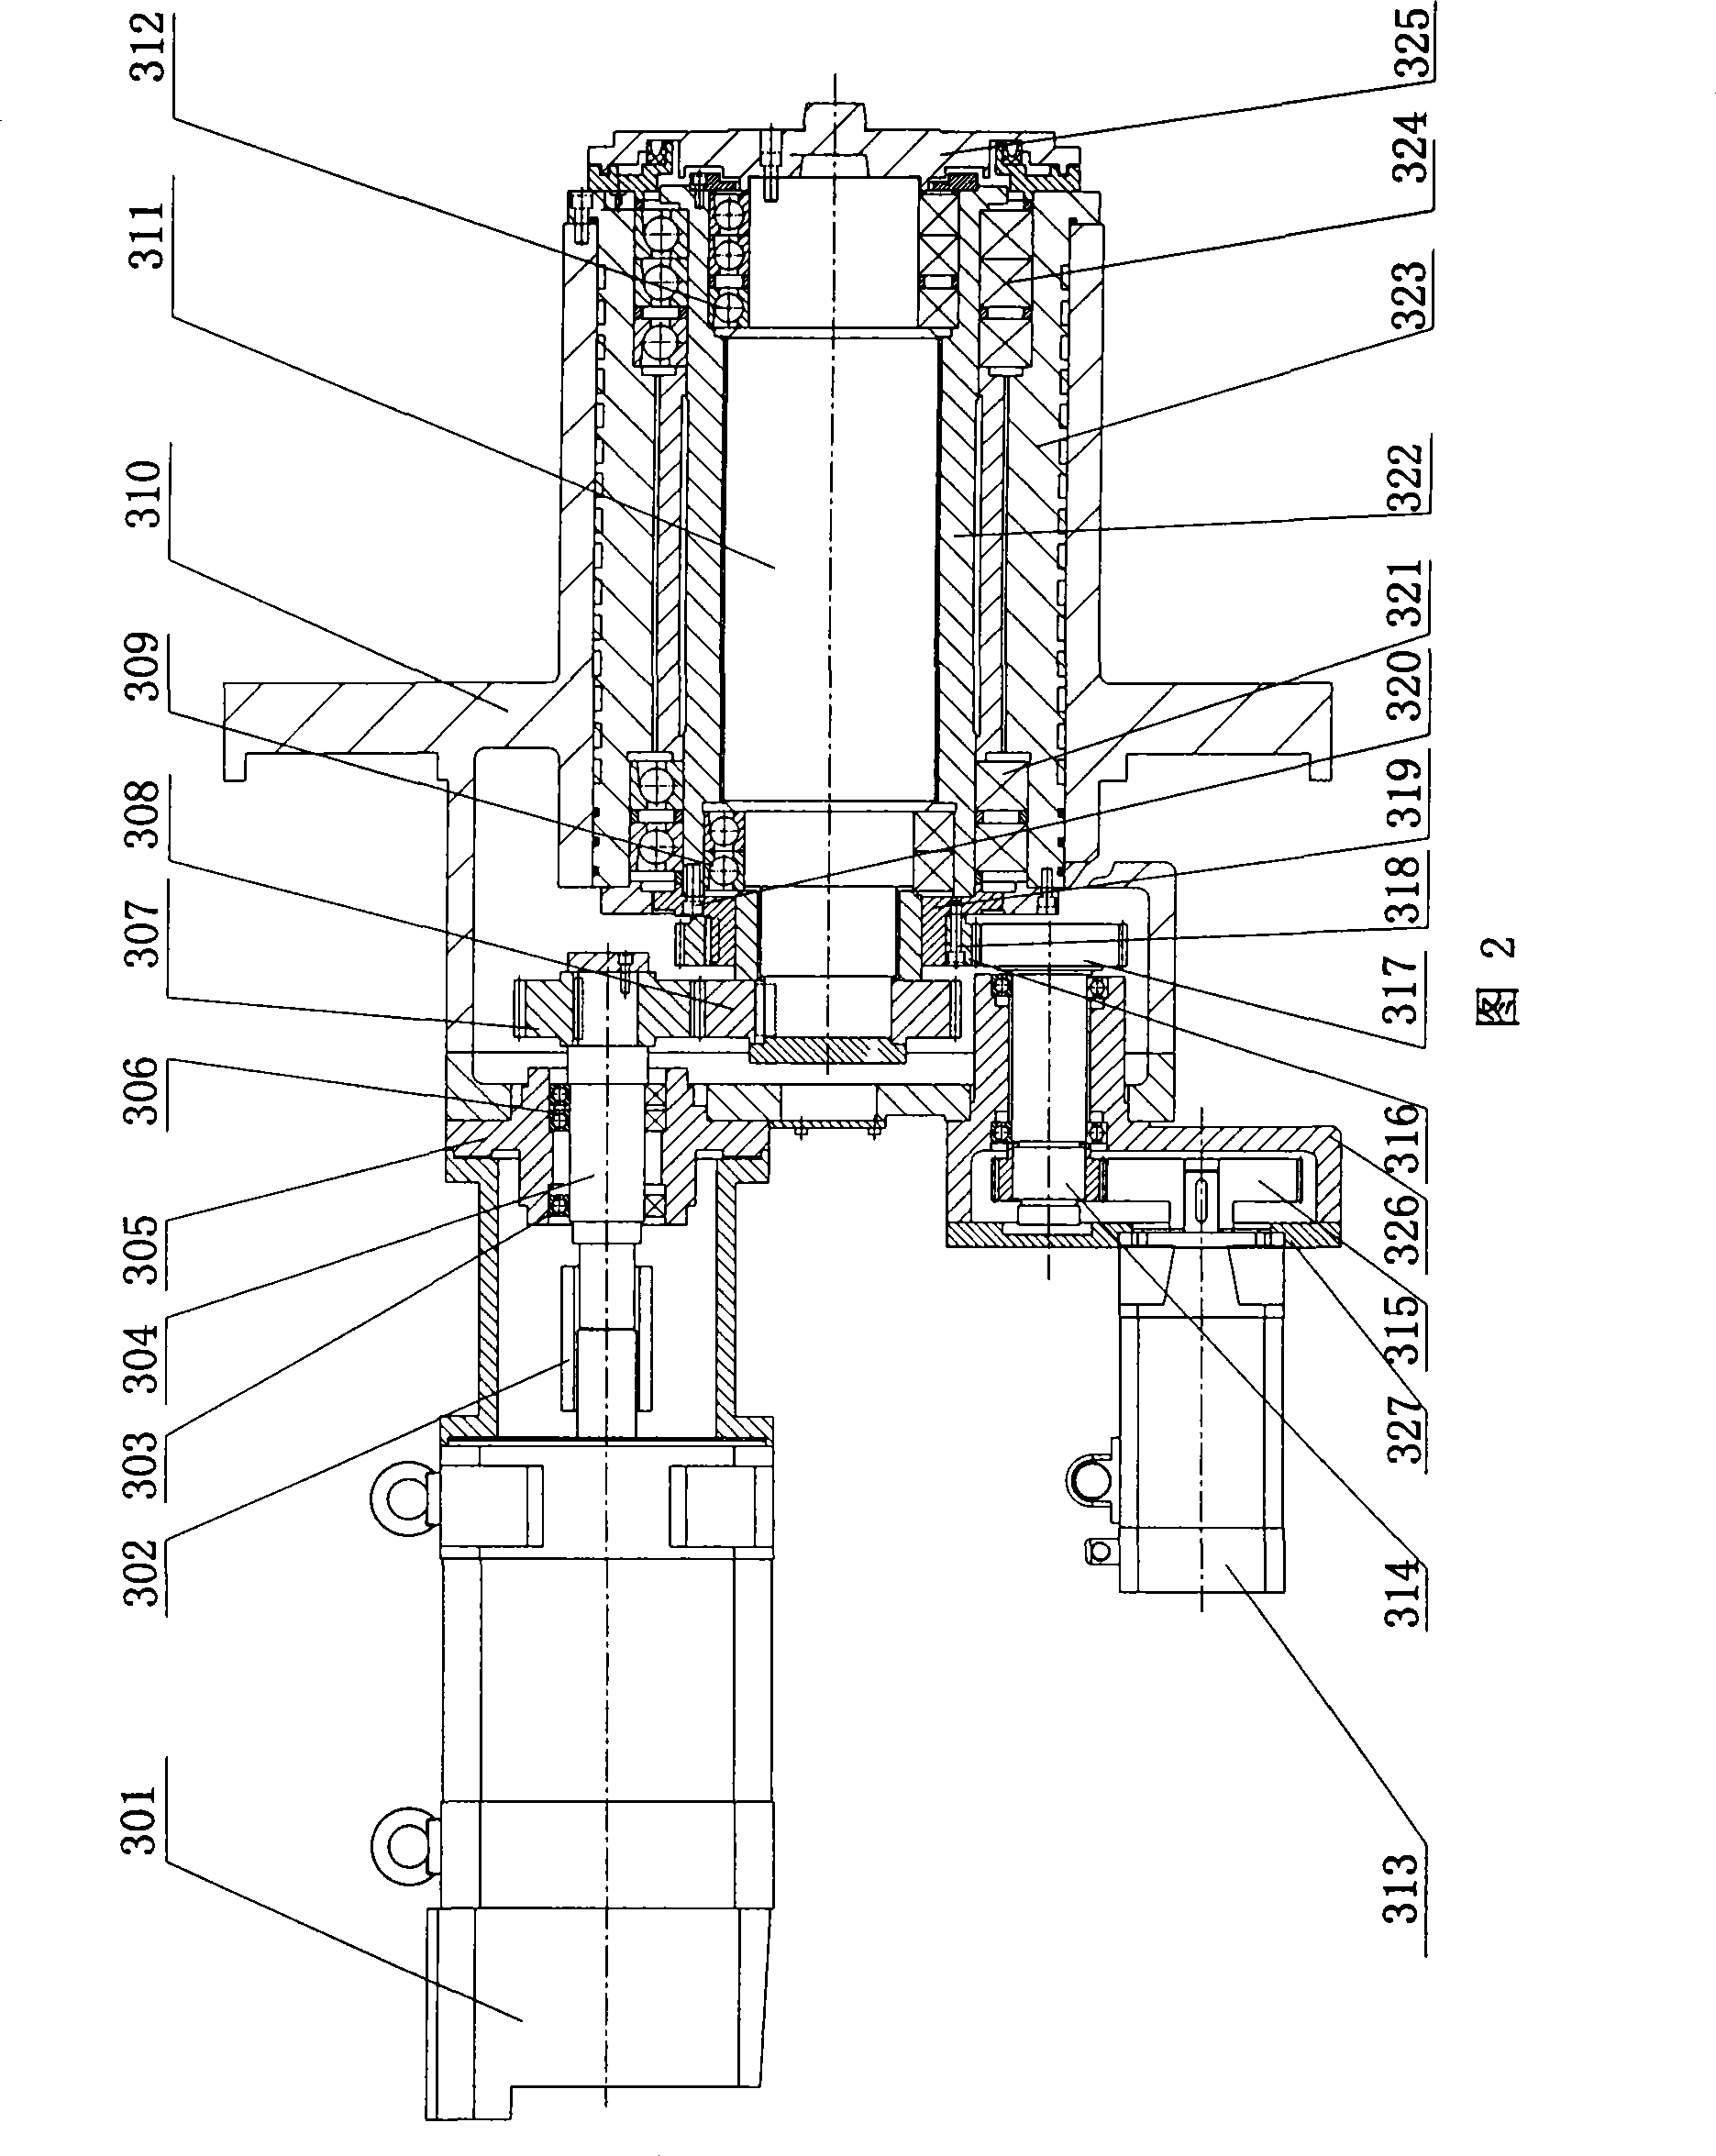 Numerical control tooth grinder for spiral bevel gear